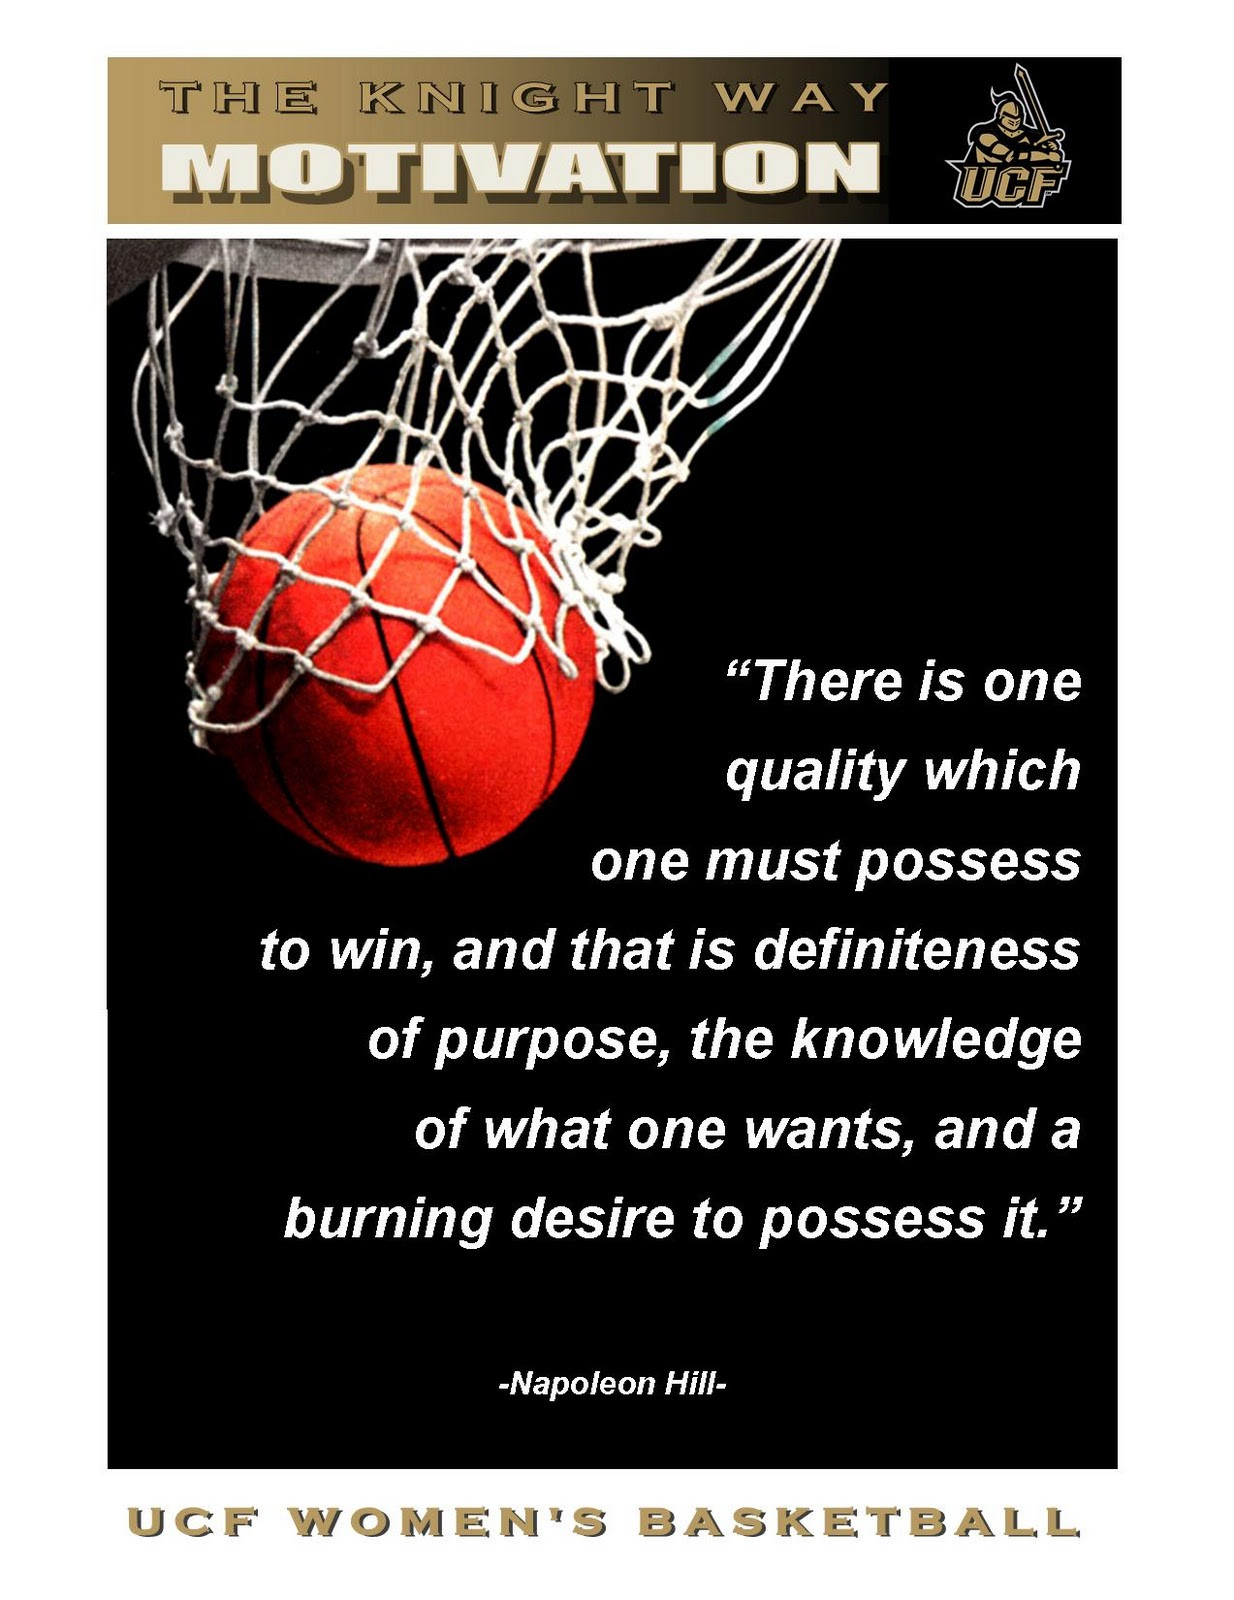 Basketball Motivational Quotes
 HOOP THOUGHTS PRACTICE POINTERS 4 PLAYER NOTEBOOKS